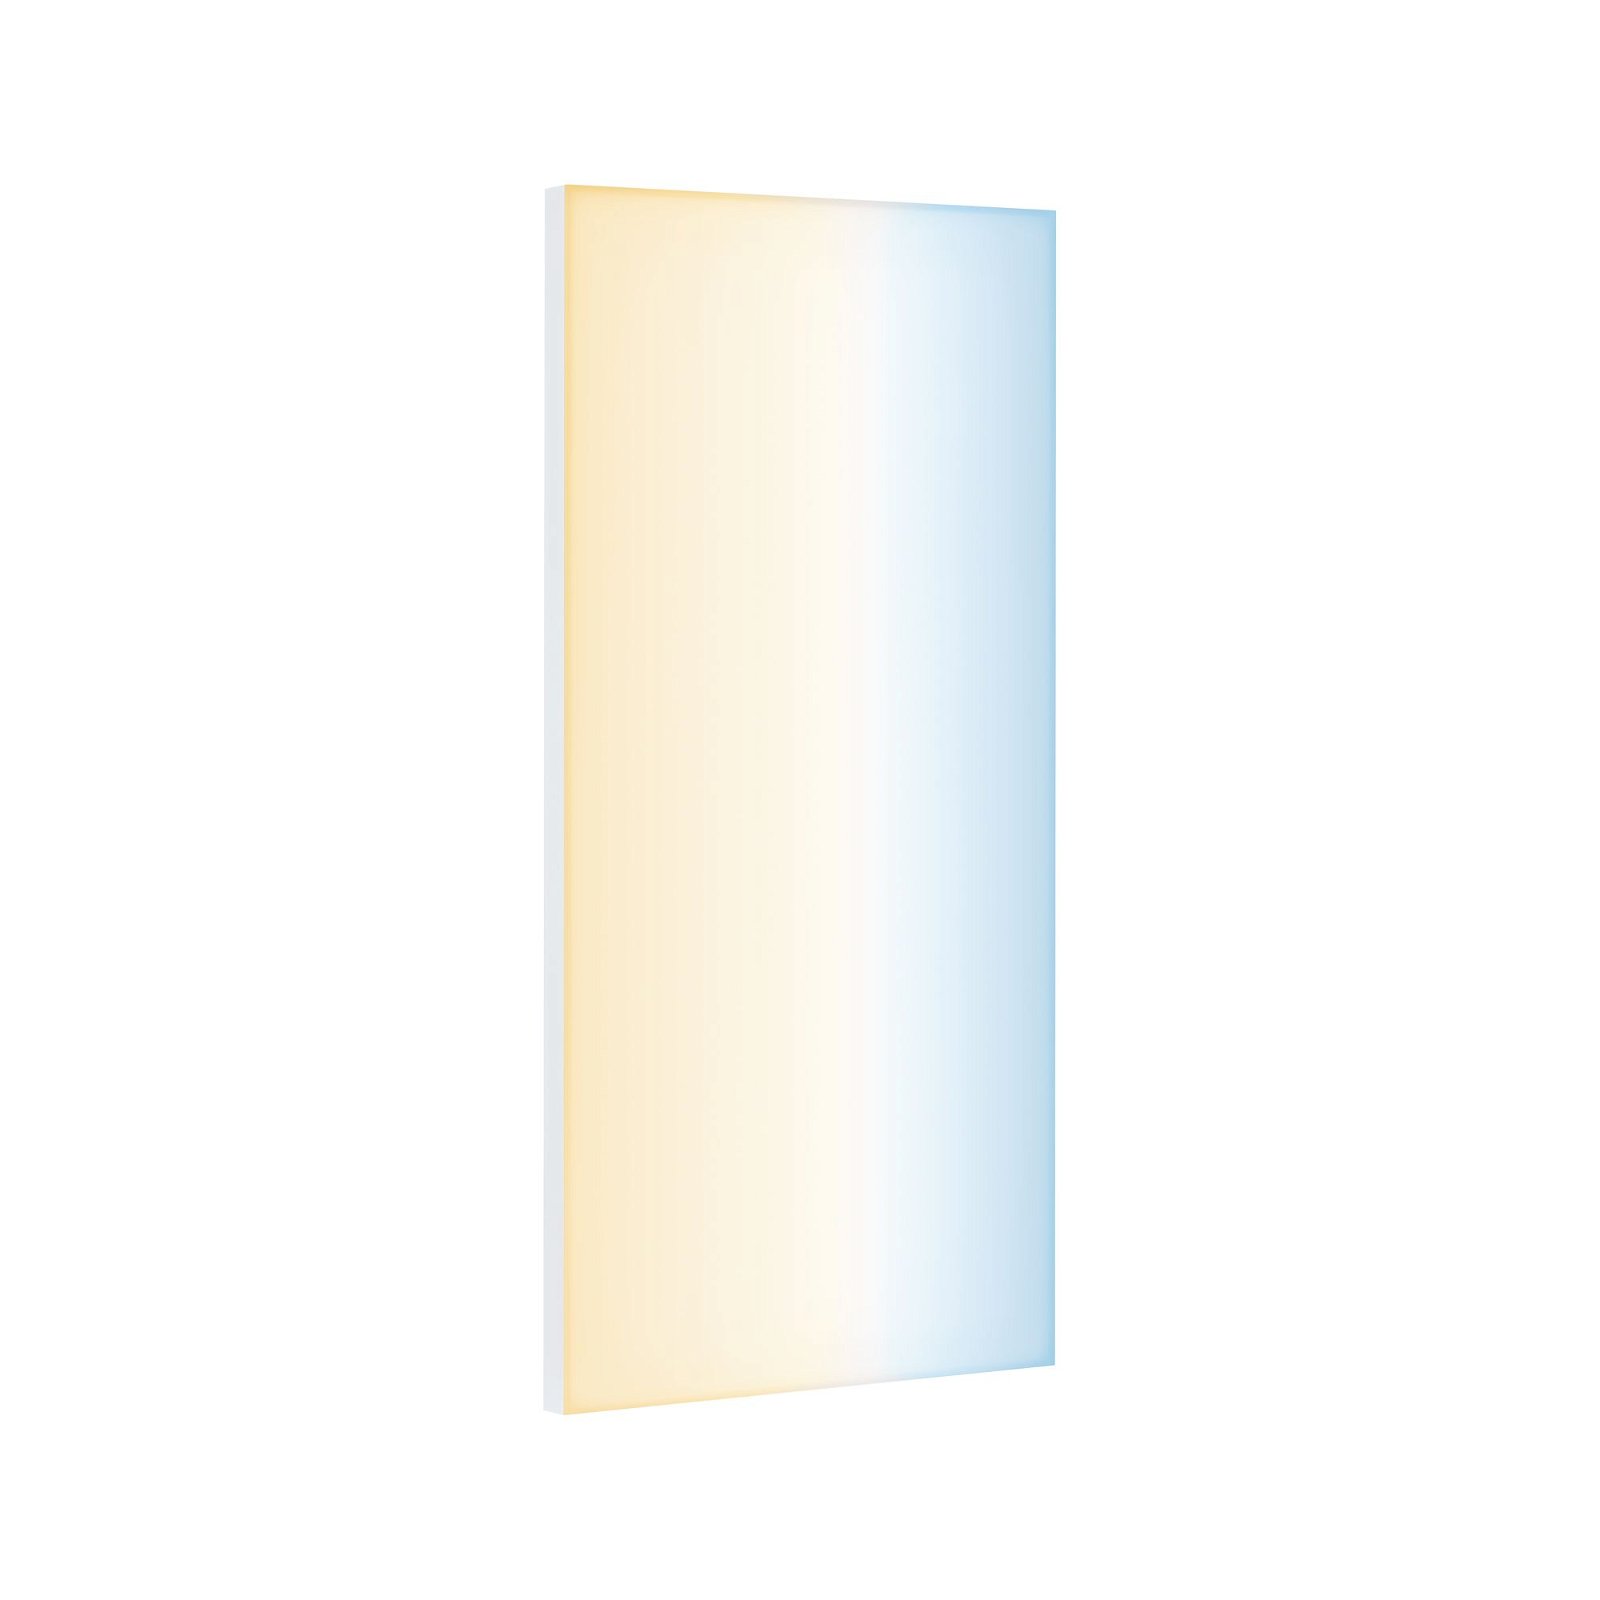 LED Panel Smart Home Zigbee Velora square 595x295mm 15,5W 1600lm Tunable White Matt white dimmable